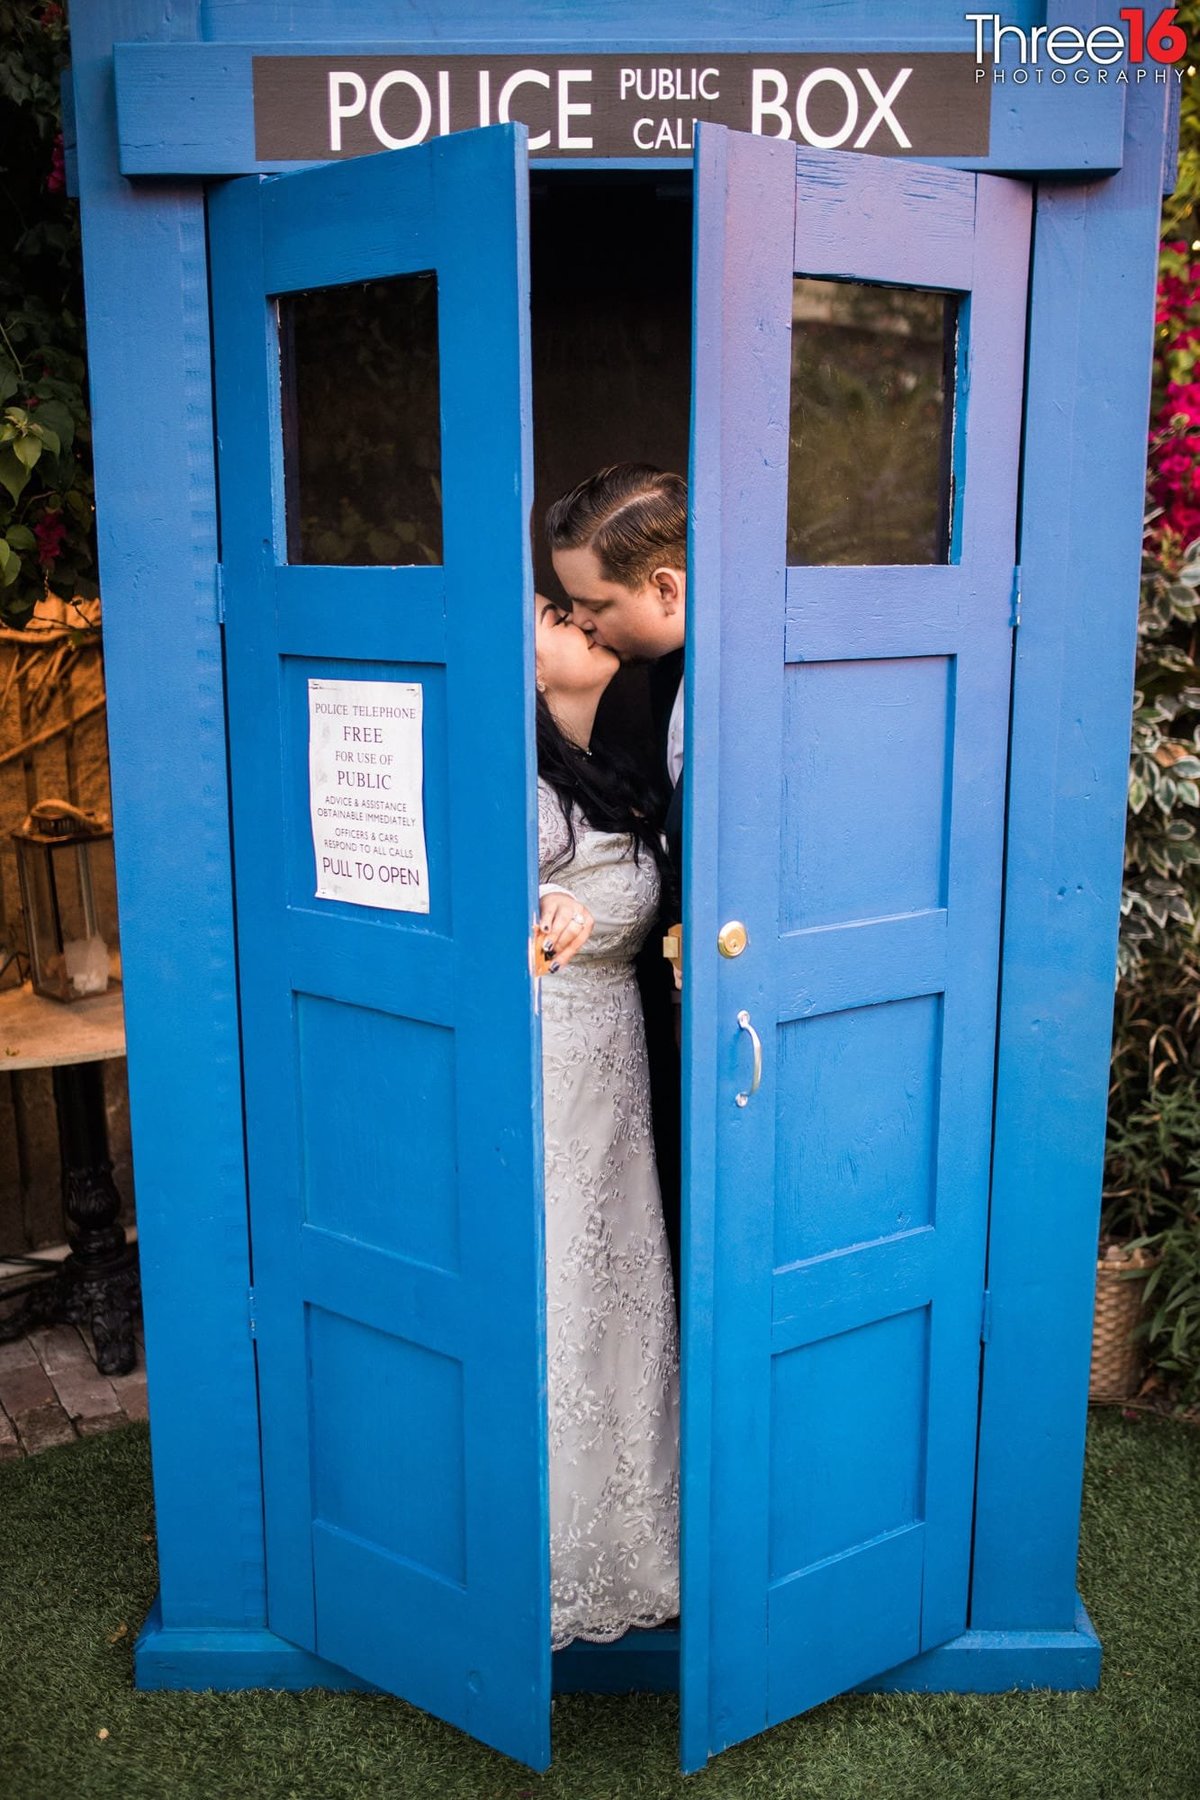 Husband and Wife kiss inside the public police box